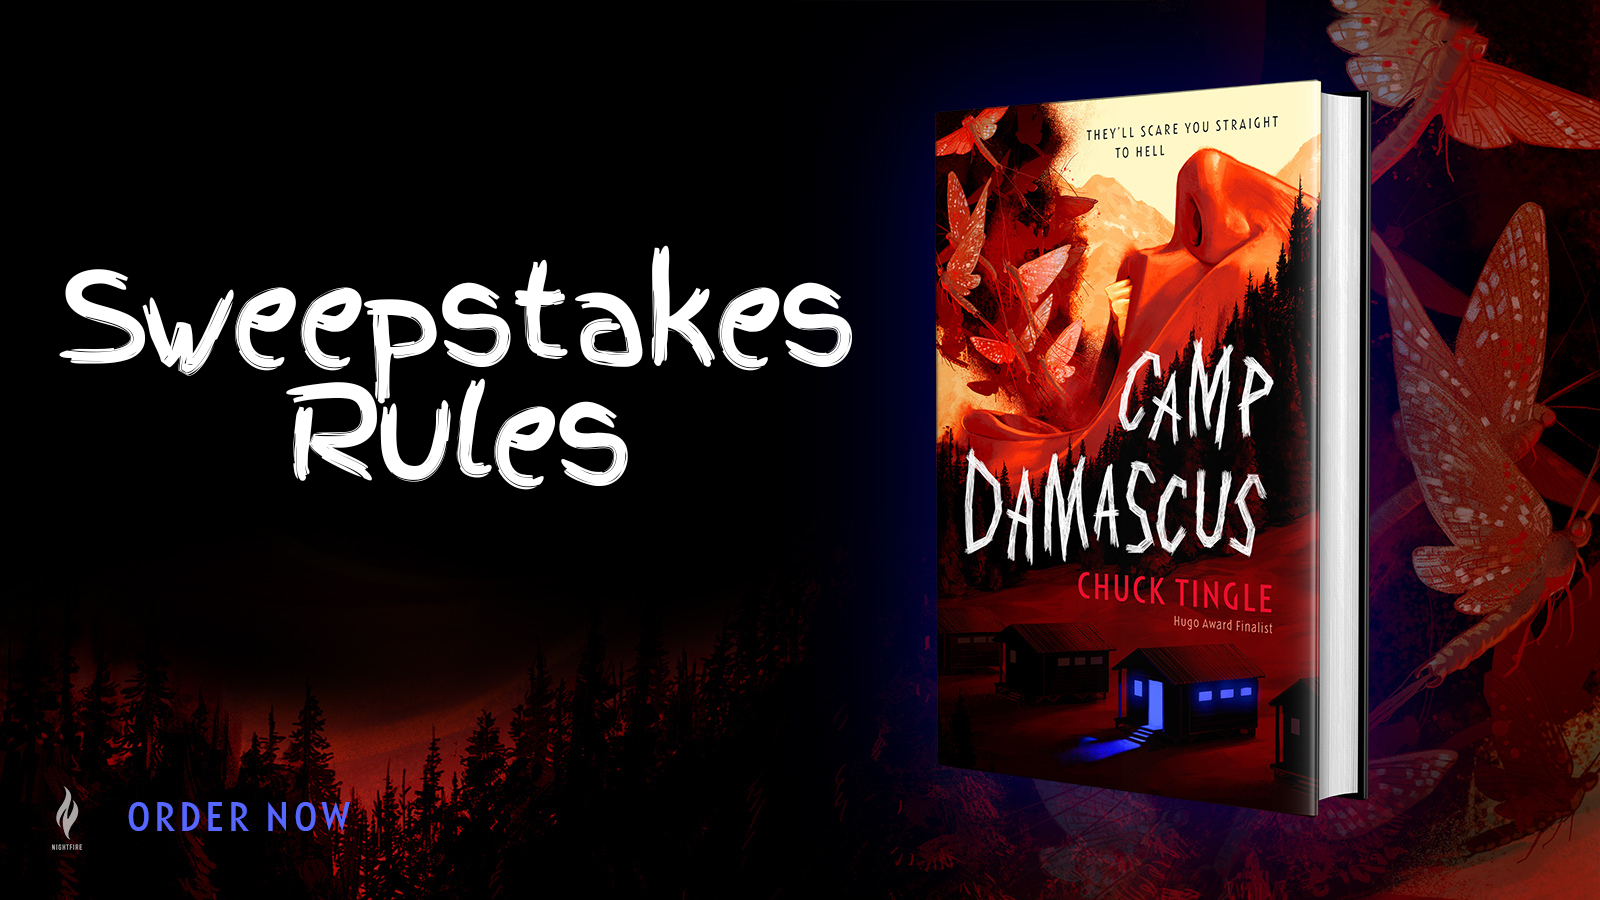 Camp Damascus Sweepstakes Rules - 853